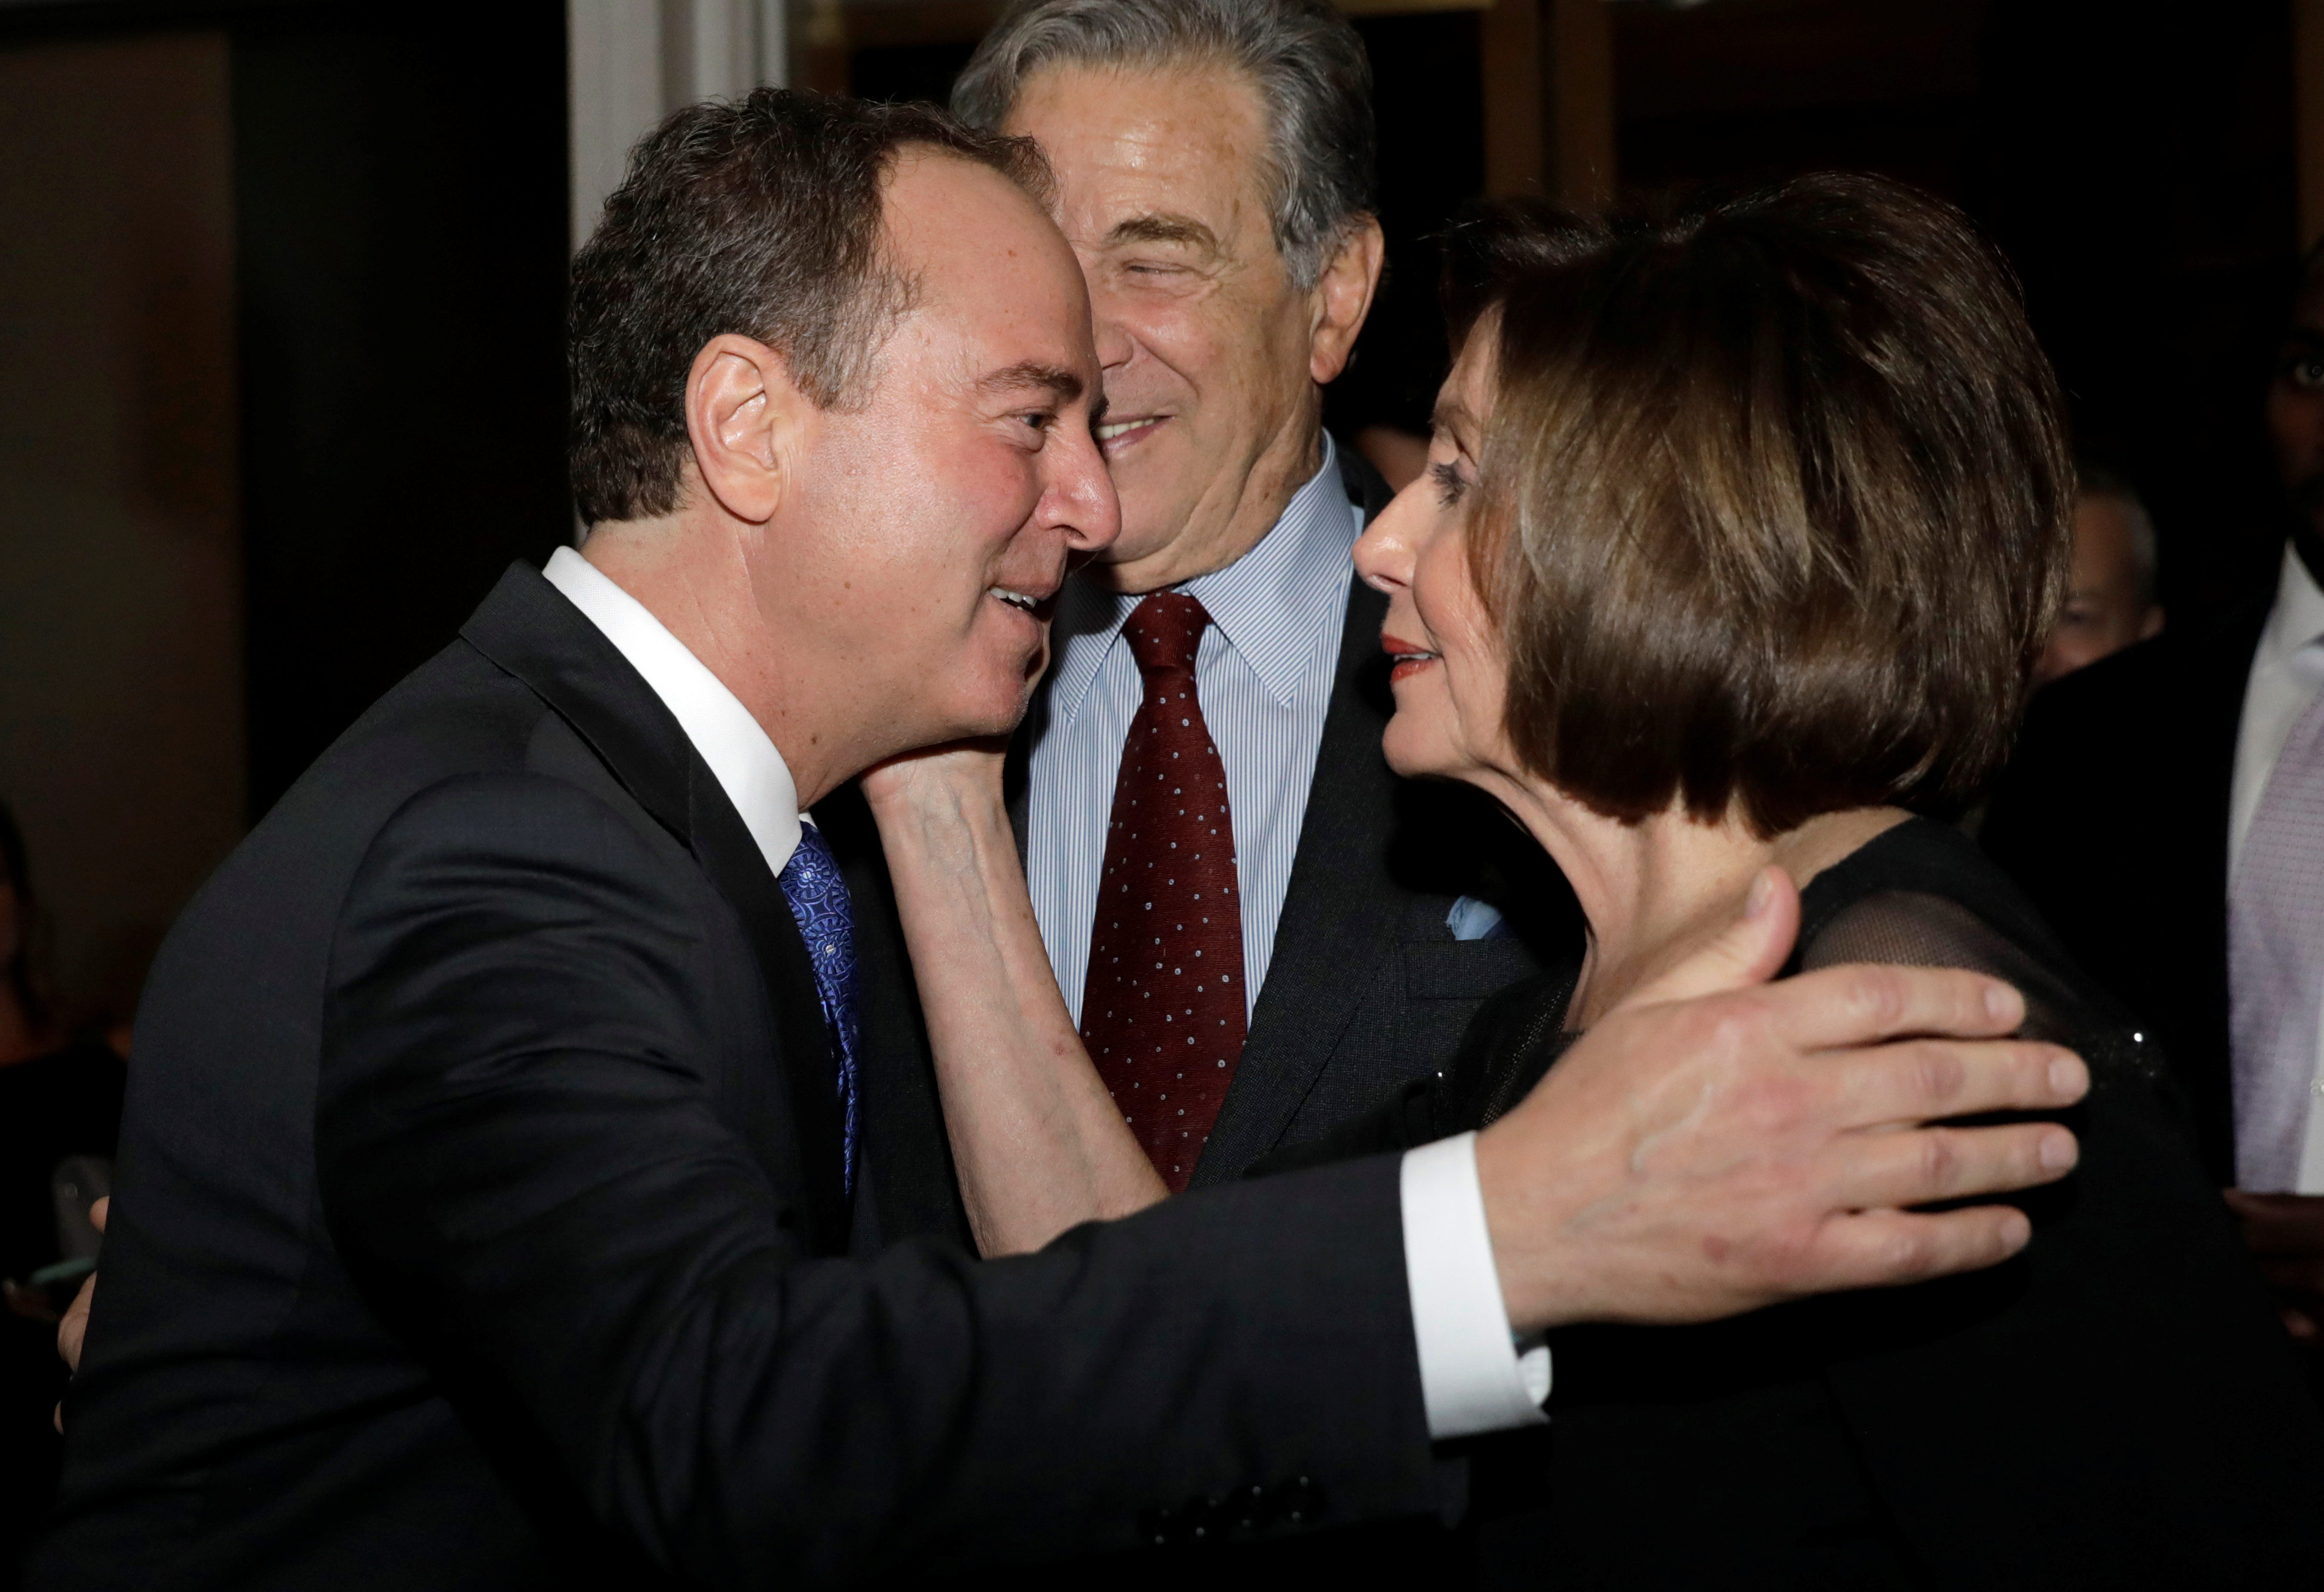 U.S. House Speaker Nancy Pelosi (D-CA) and Congressman Adam Schiff (D-CA) hug as they arrive ahead of comedian Dave Chappelle receiving the Mark Twain Prize for American Humor at the Kennedy Center in Washington, U.S., October 27, 2019. REUTERS/Yuri Gripas